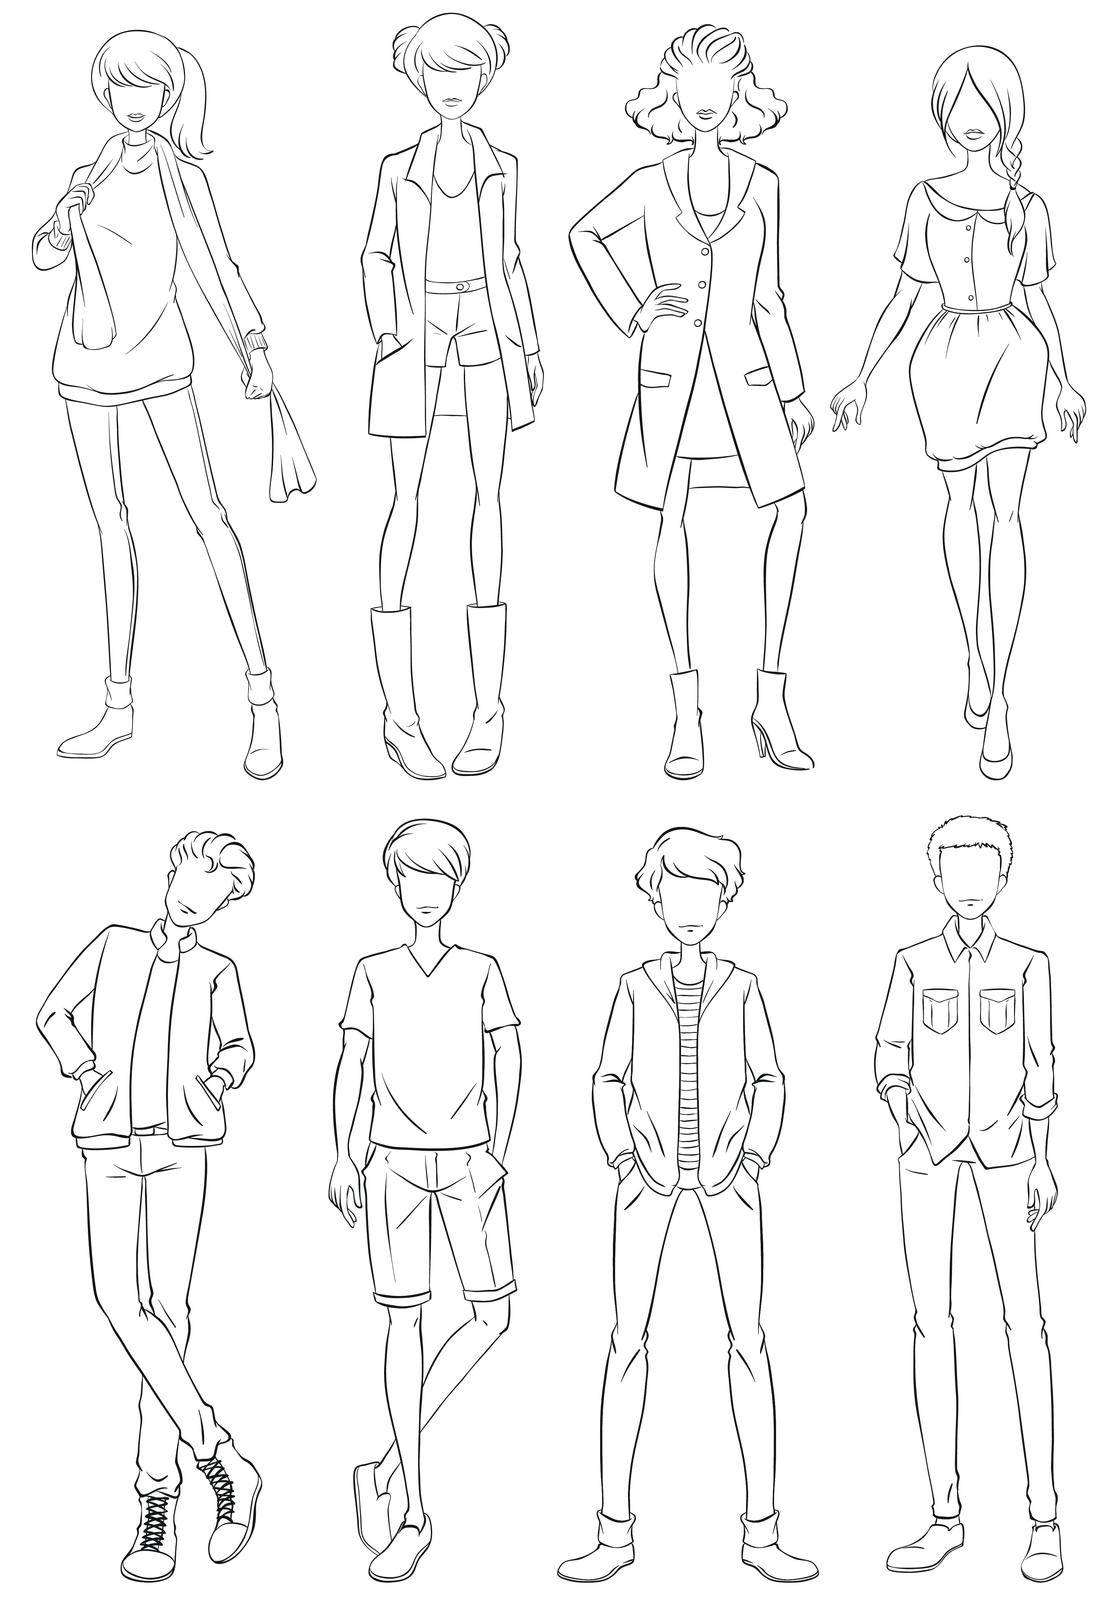 Sketch of men and woman in fashion clothing